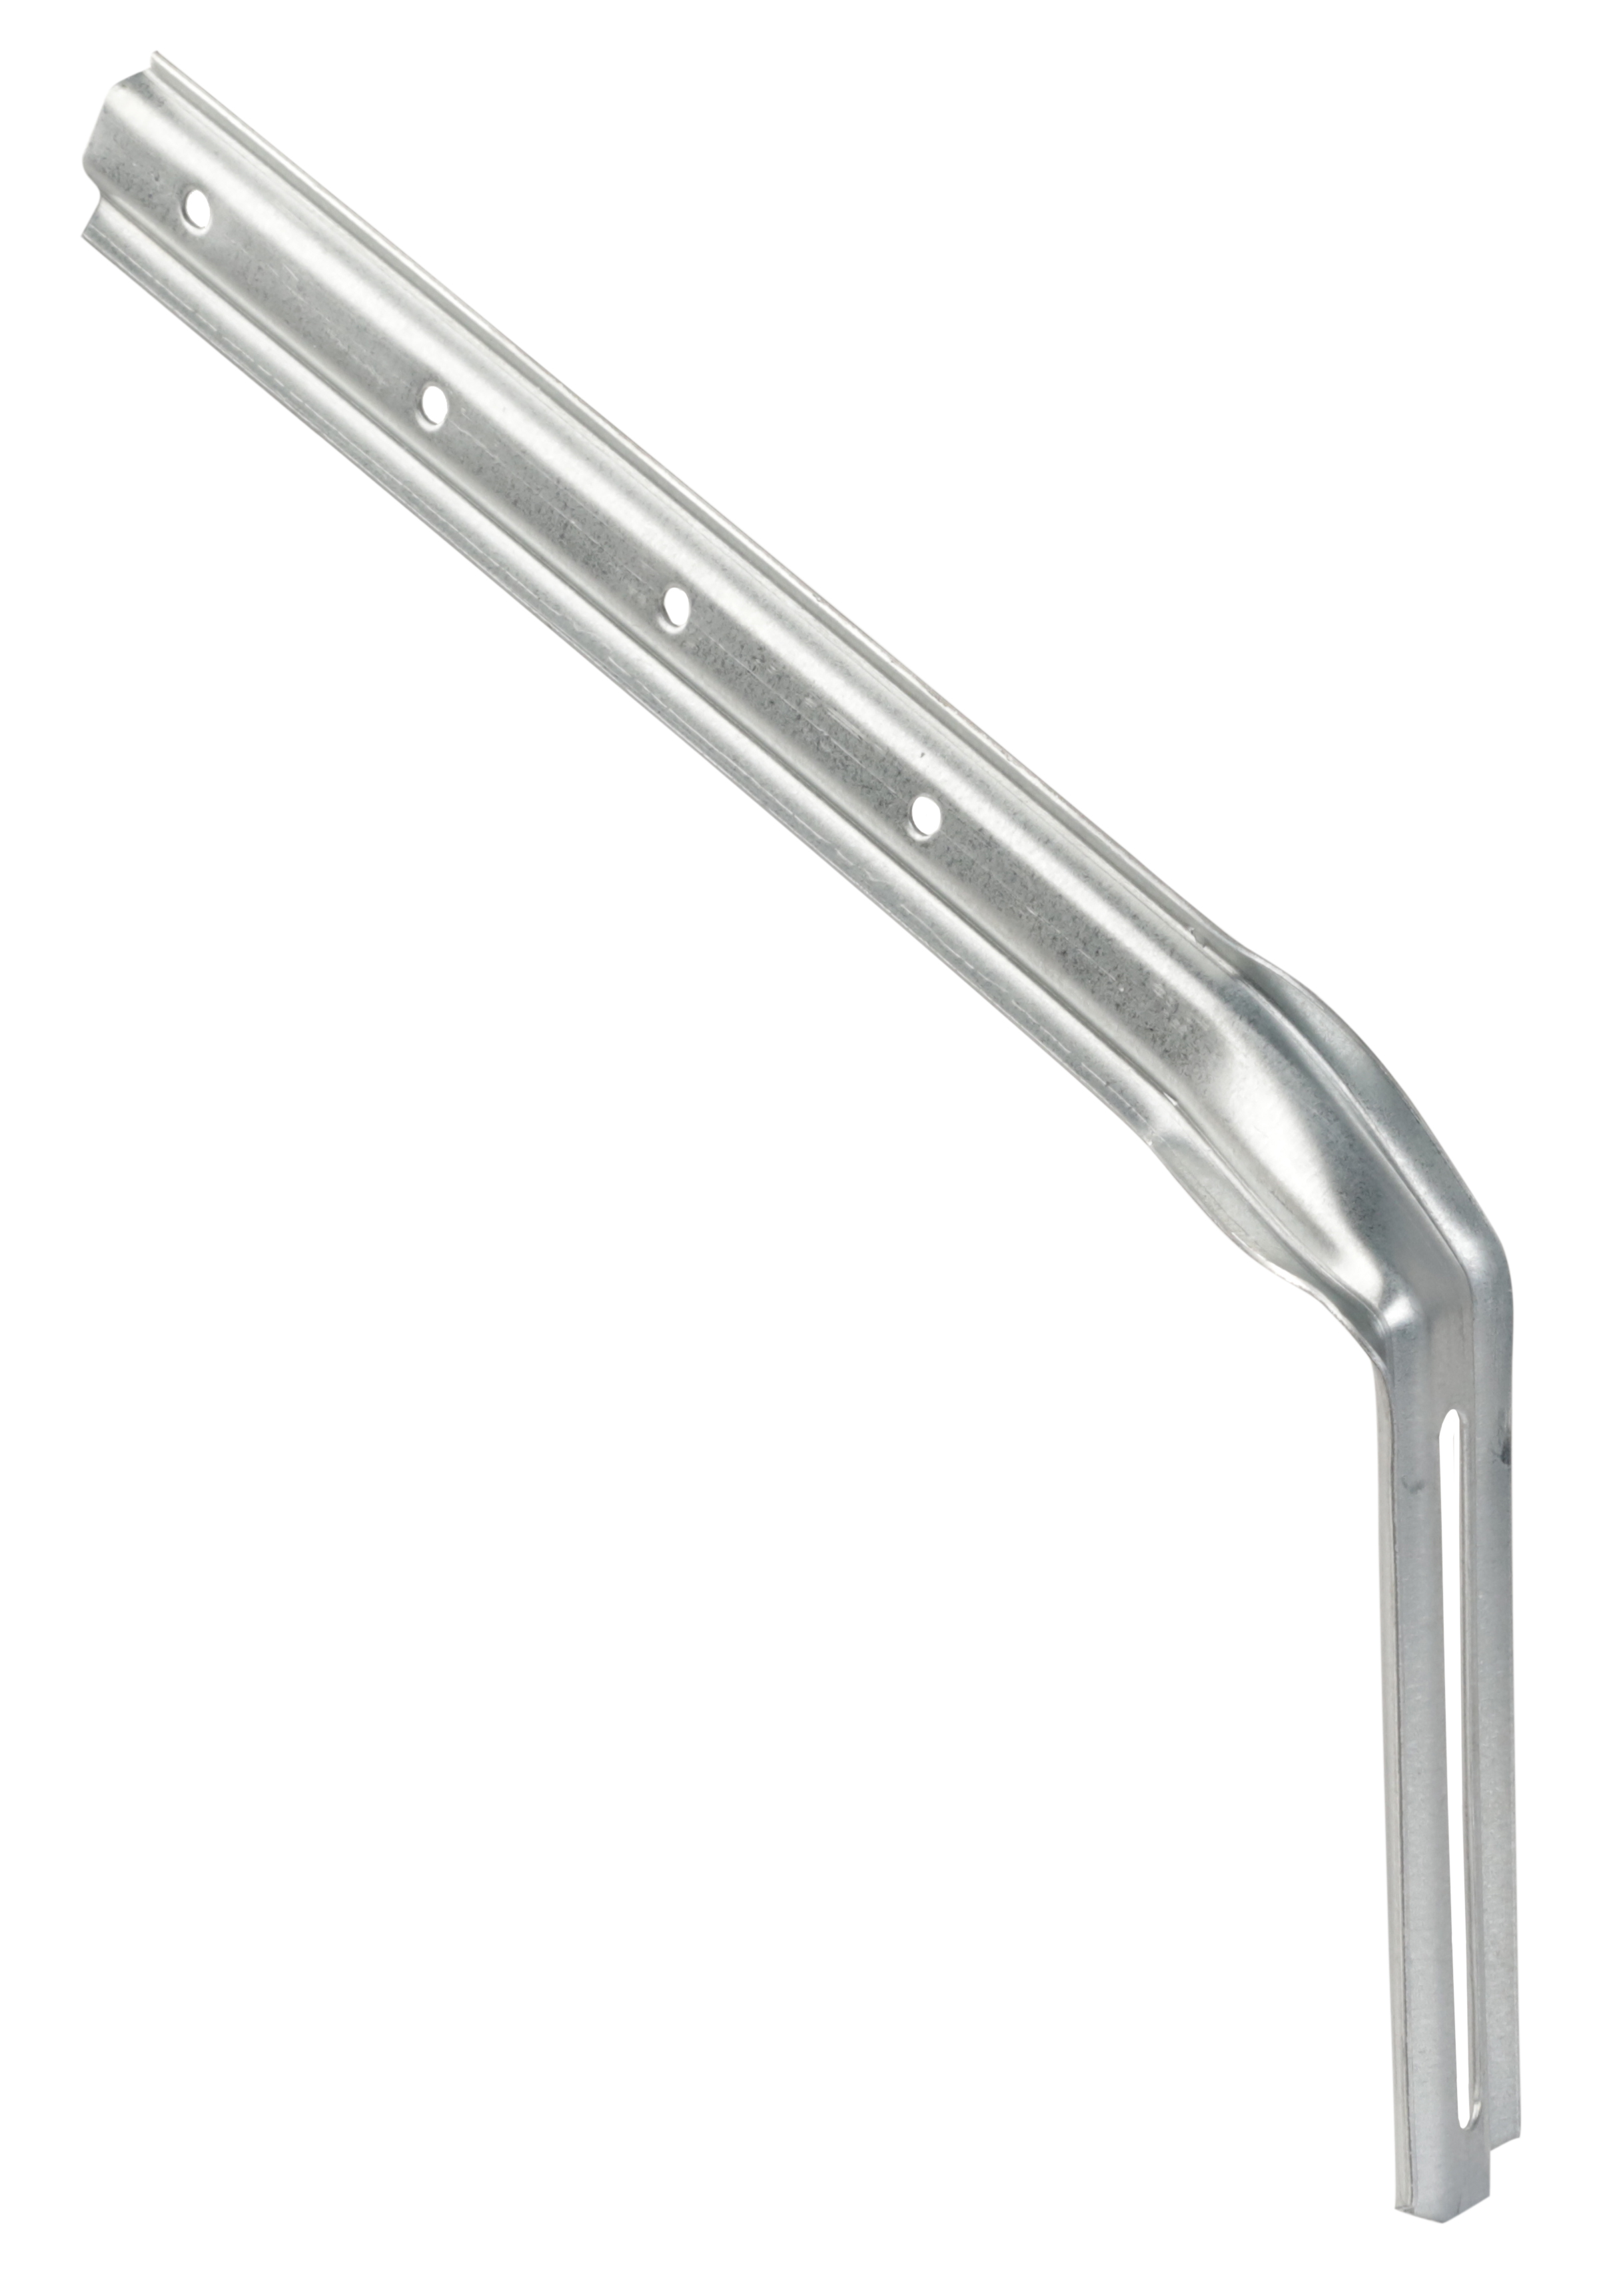 250 mm hook tail, ribbed back strap, galvanized steel